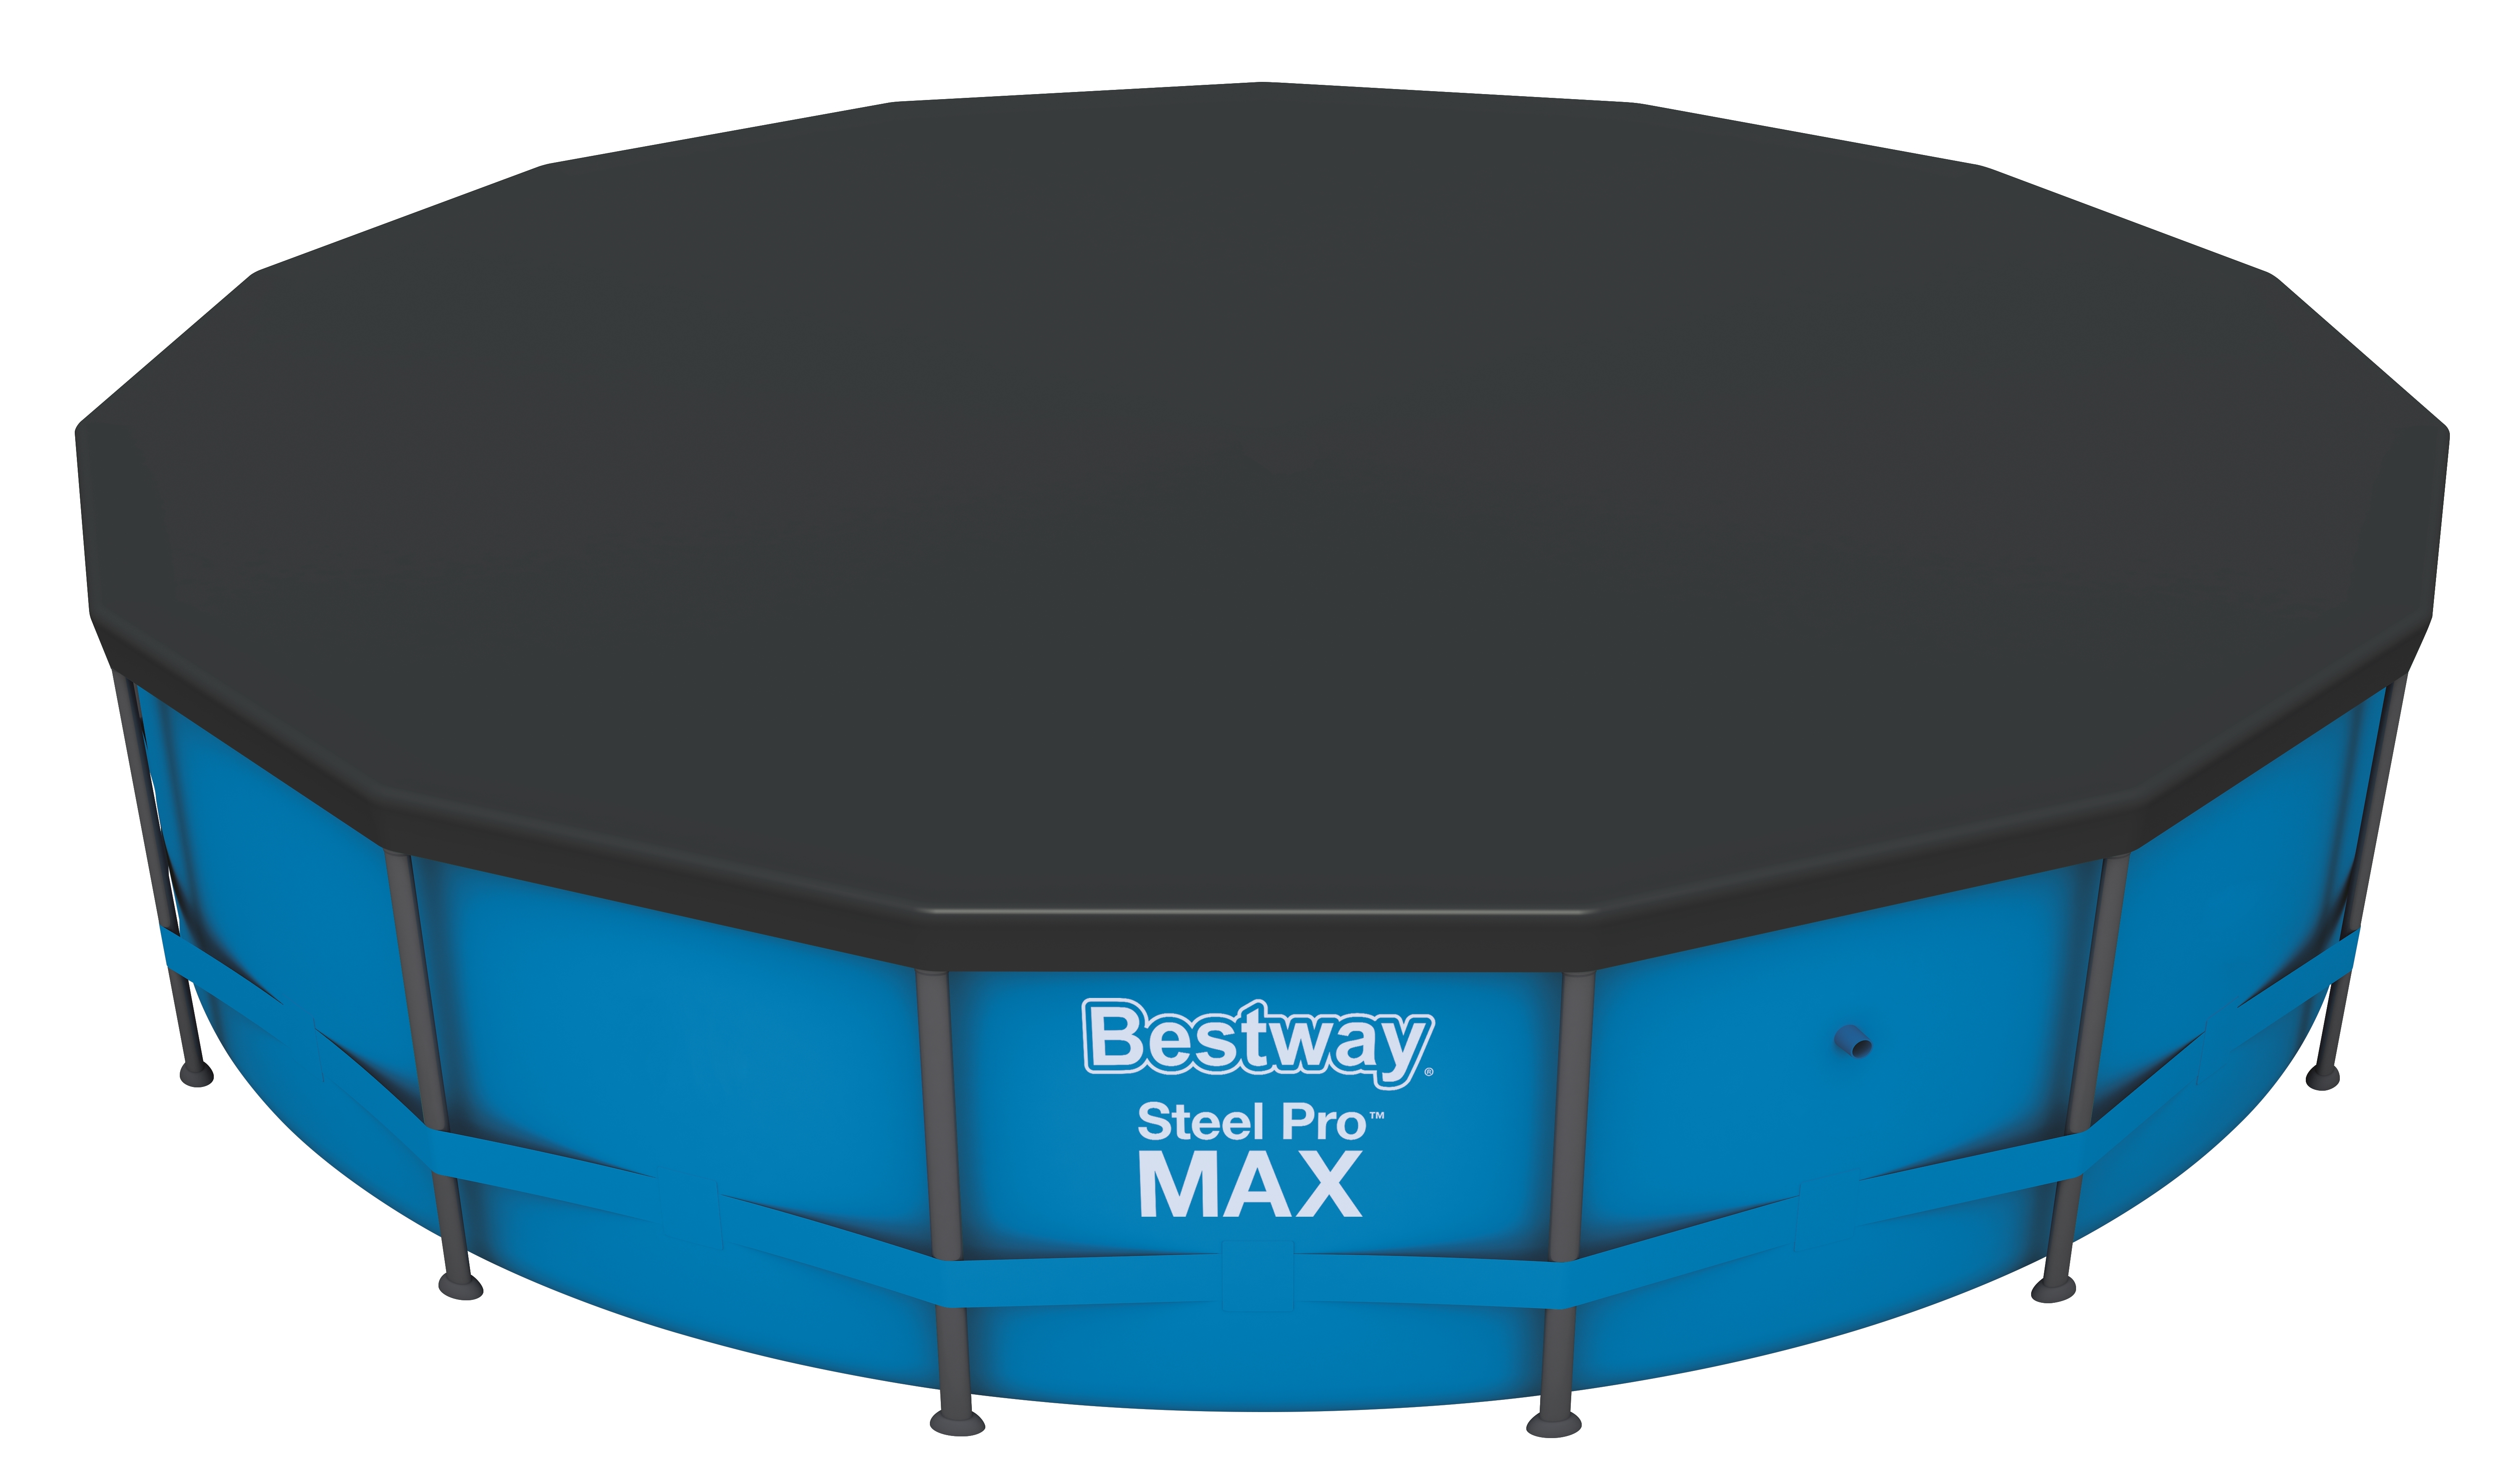 Bestway Flowclear cover rond 457/460